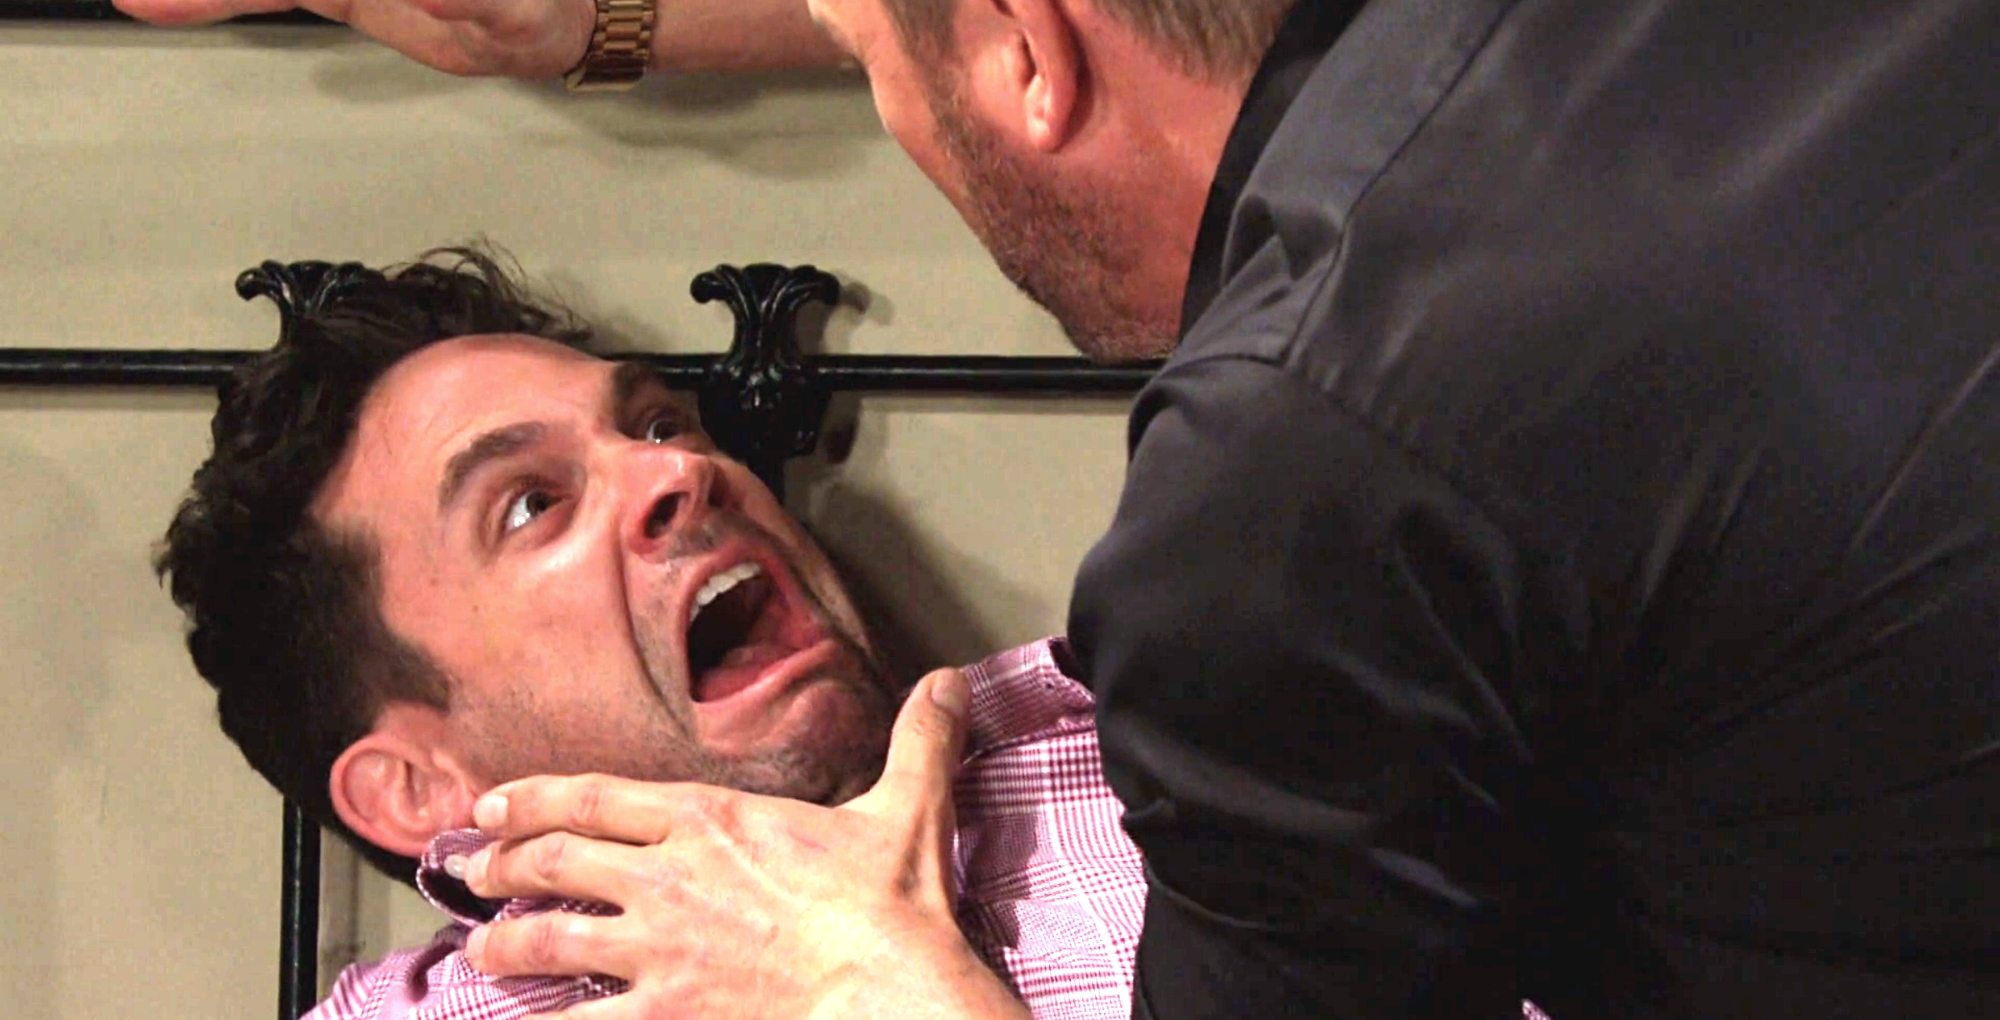 days of our lives recap for tuesday, february 28, 2023, an overzealous brady black is forced to revive the very man he kills